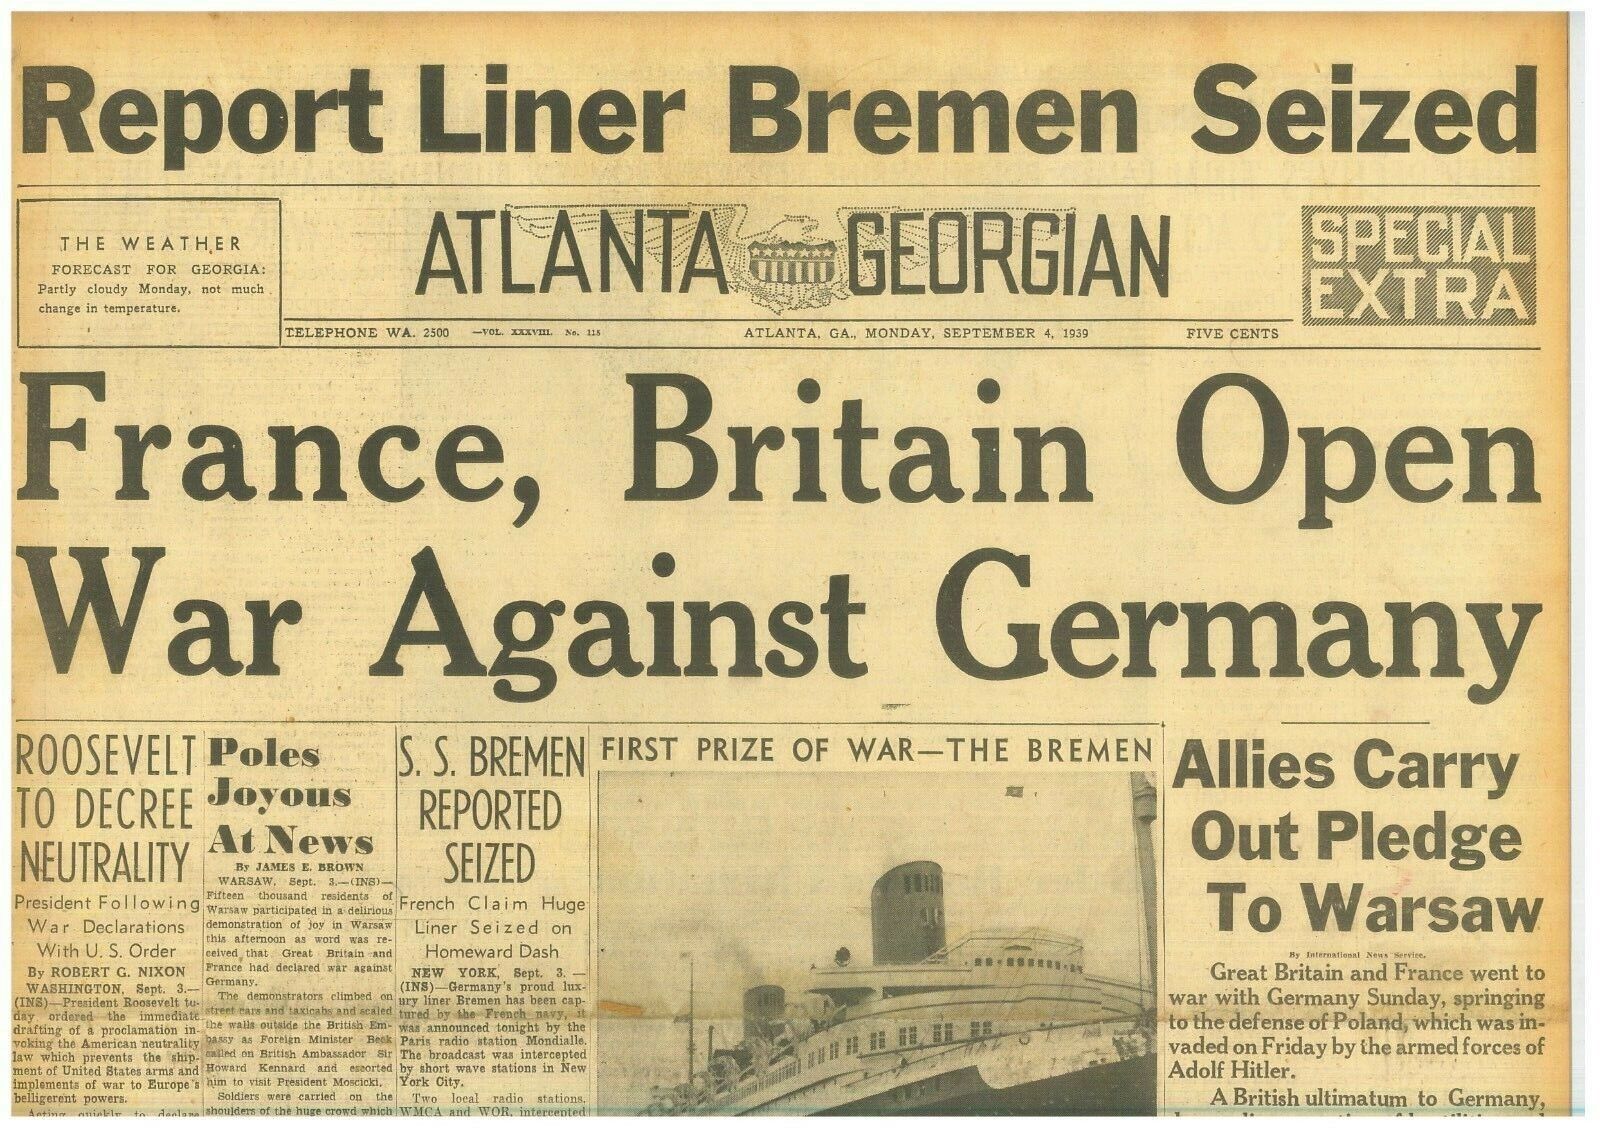 France & Britain at War with Germany Allies\' Pledge to Poland September 4 1939